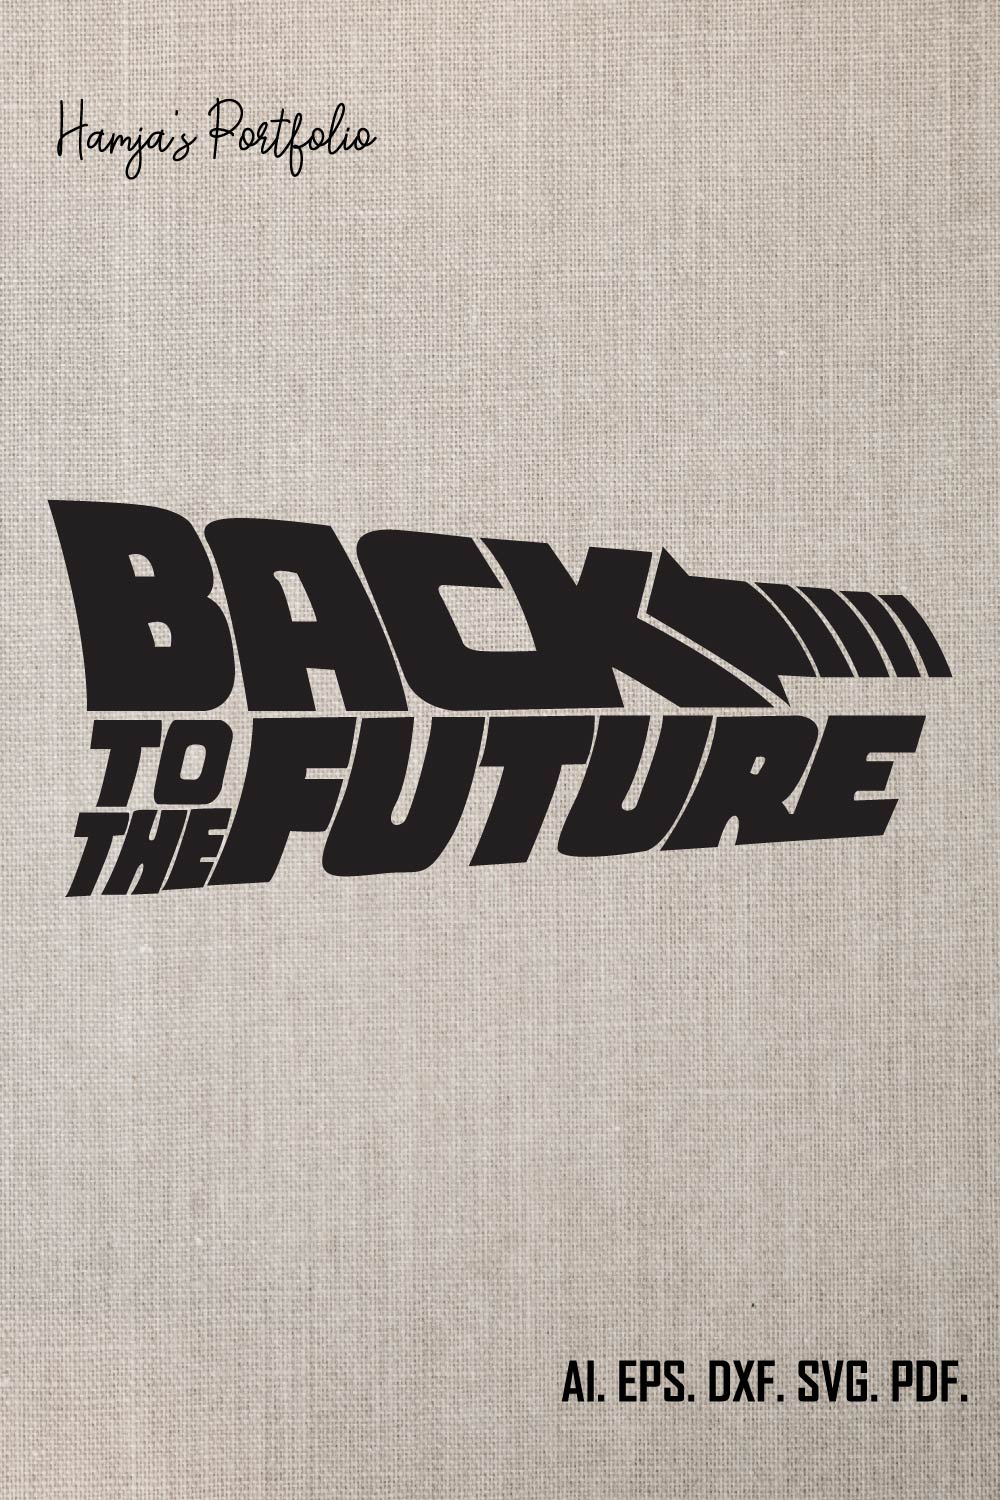 Back to the future typography vector design pinterest preview image.